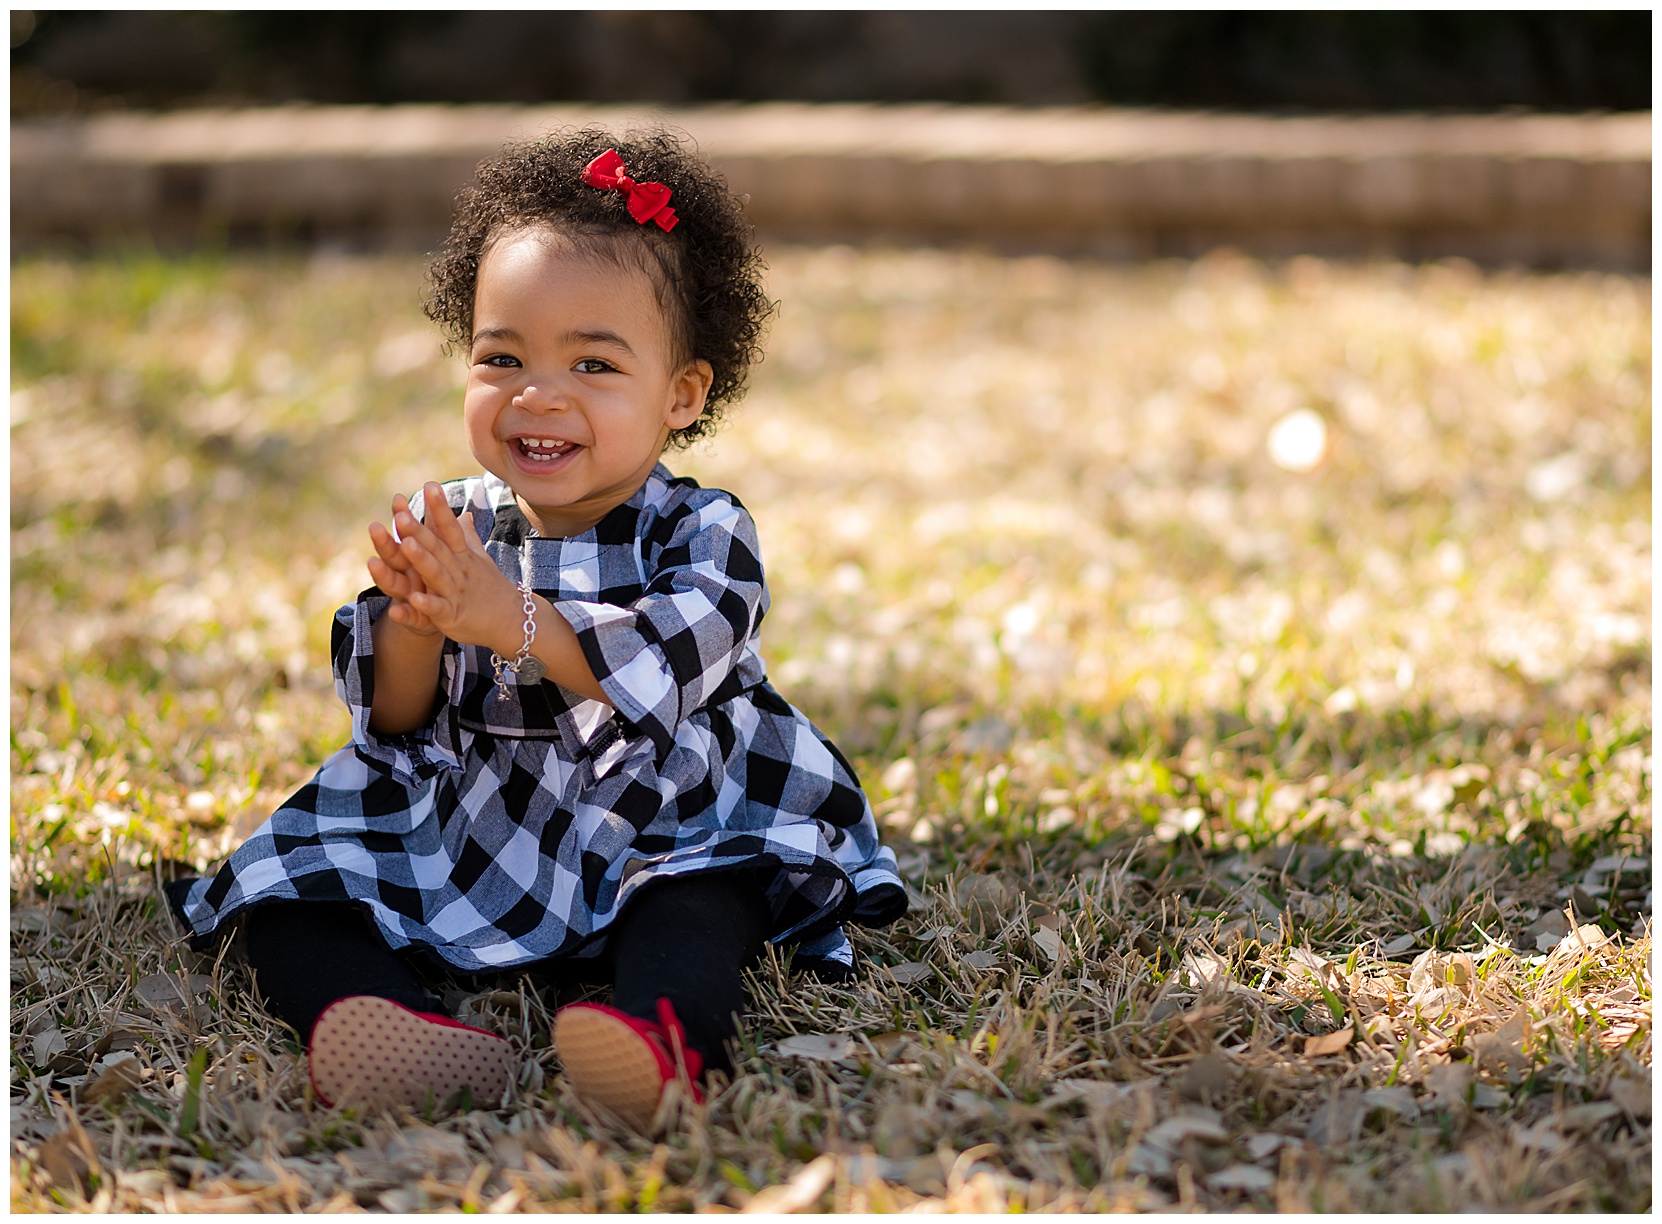 happy baby wearing a black and white checkered dress with red headband